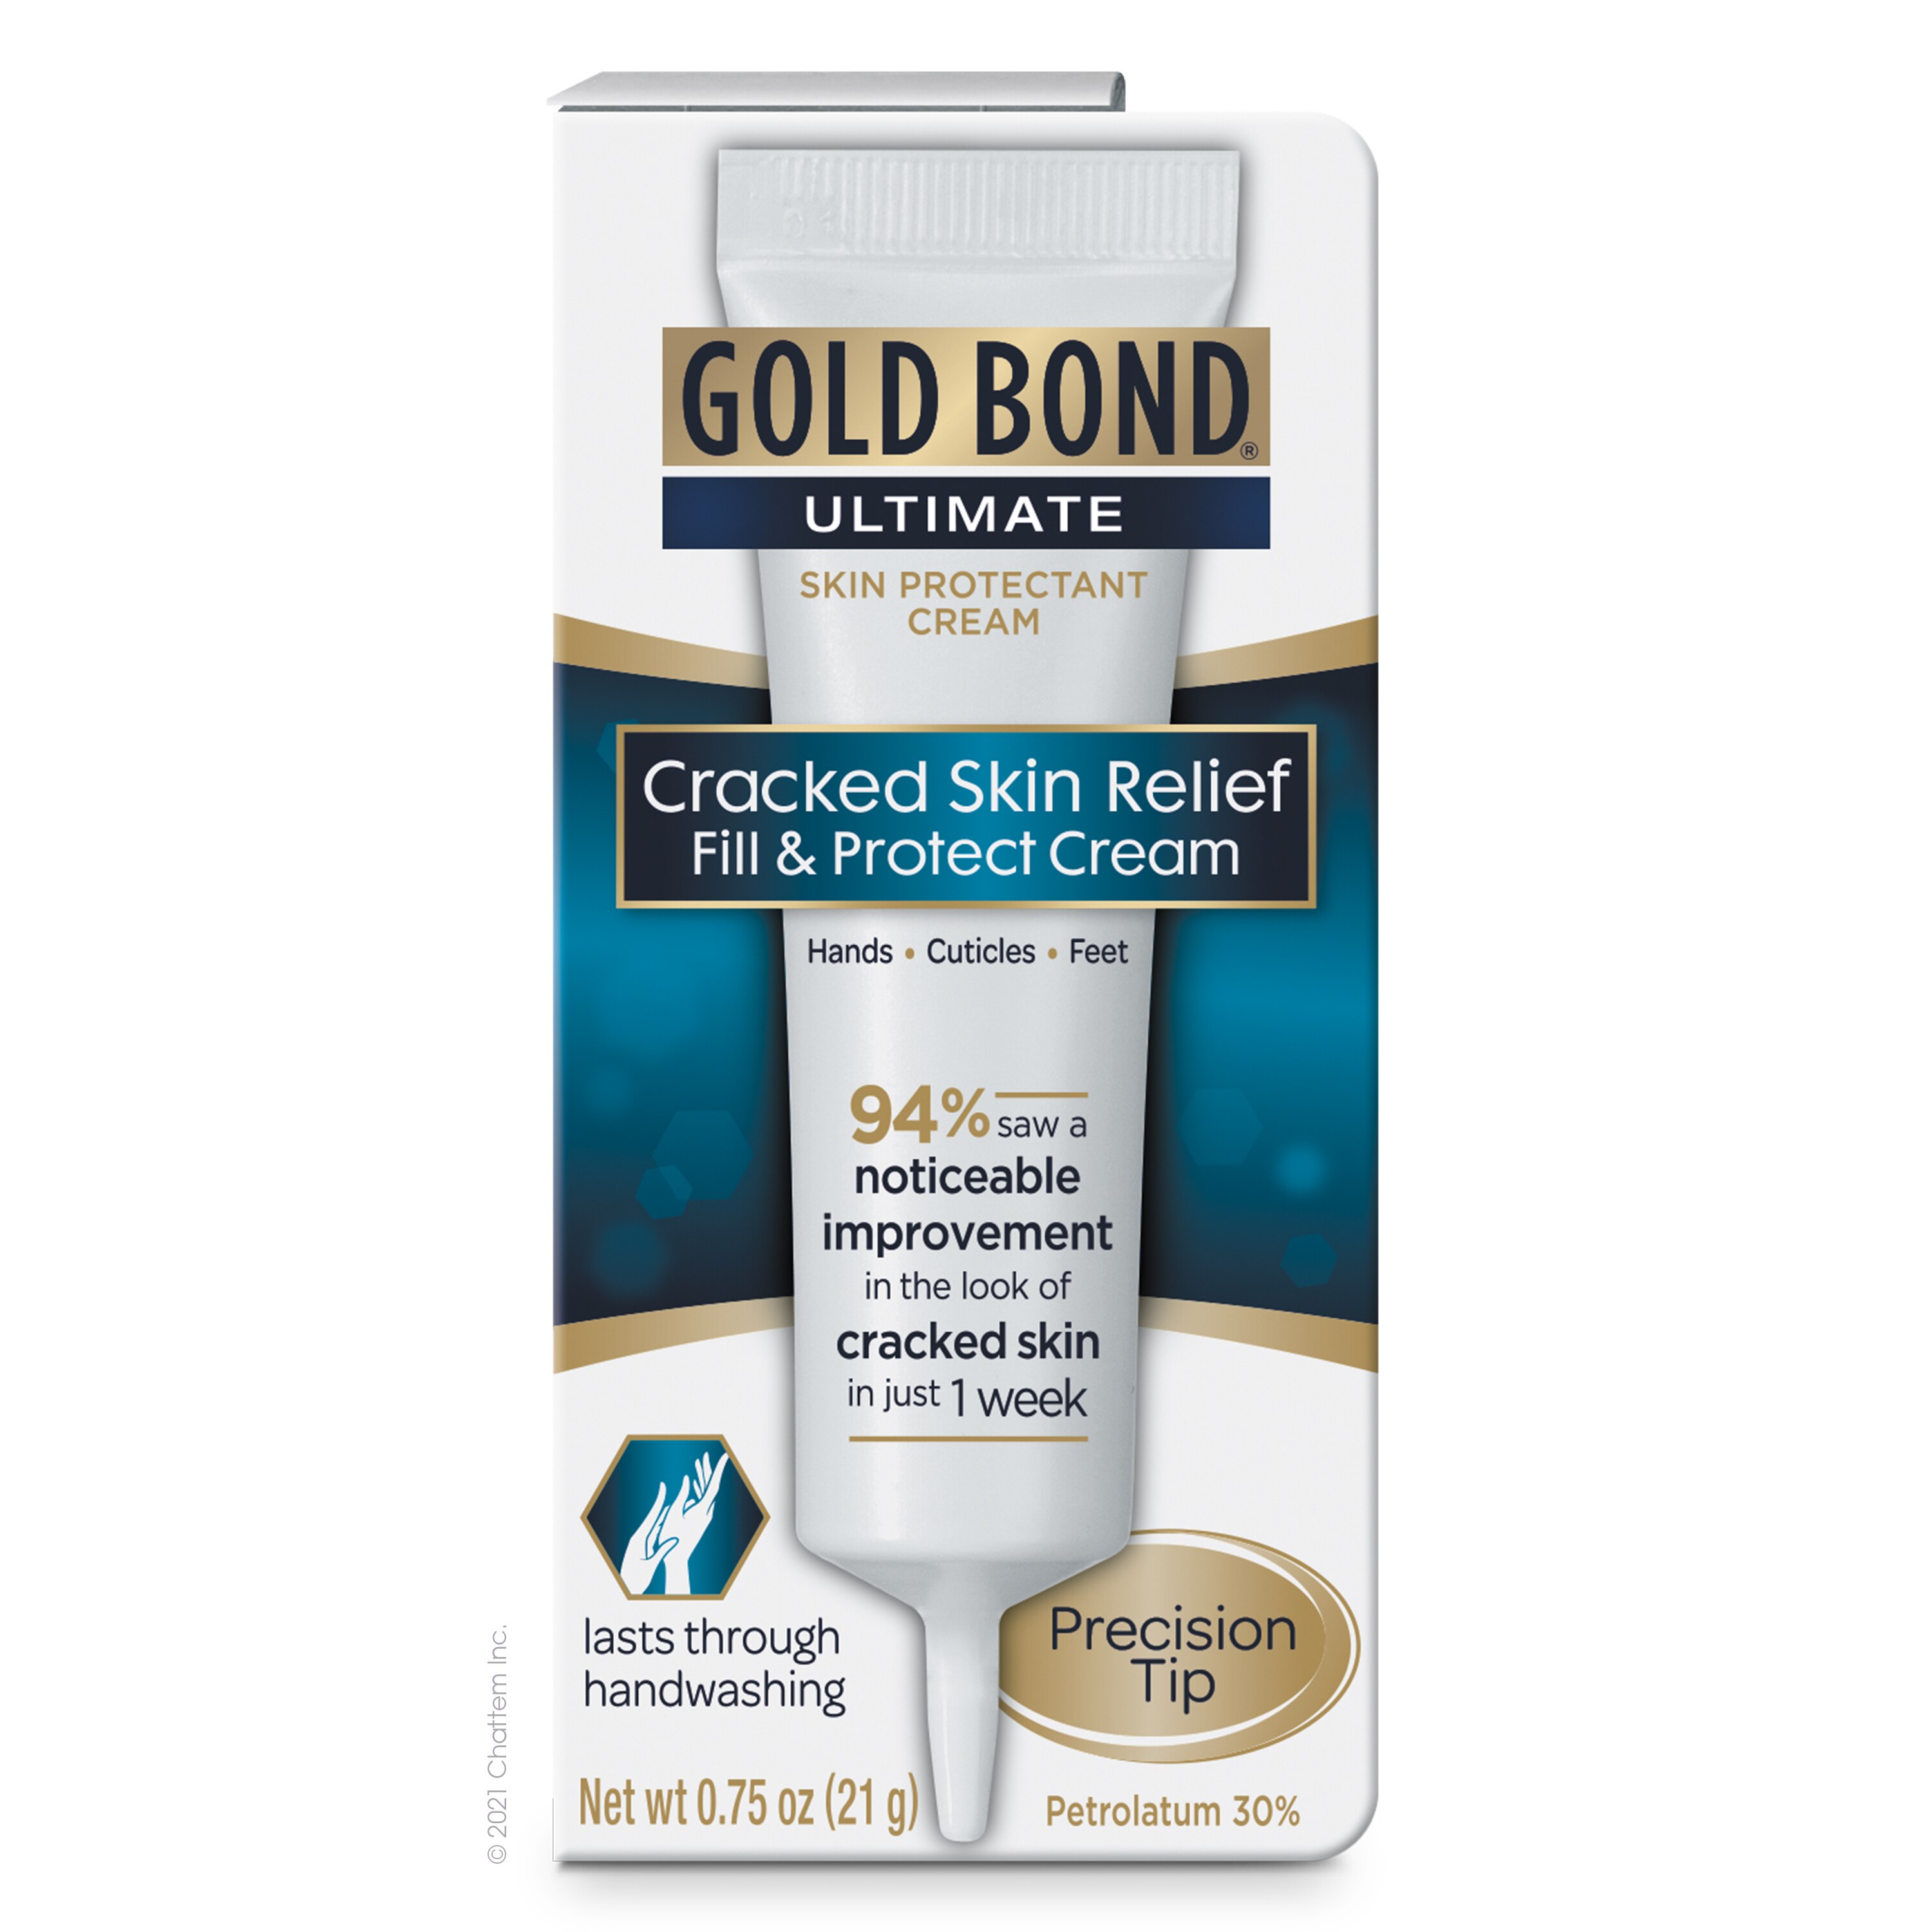 Gold Bond Ultimate Cracked Skin Relief Fill & Protect Cream for Hands, Cuticles, and Feet, 0.75 OZ